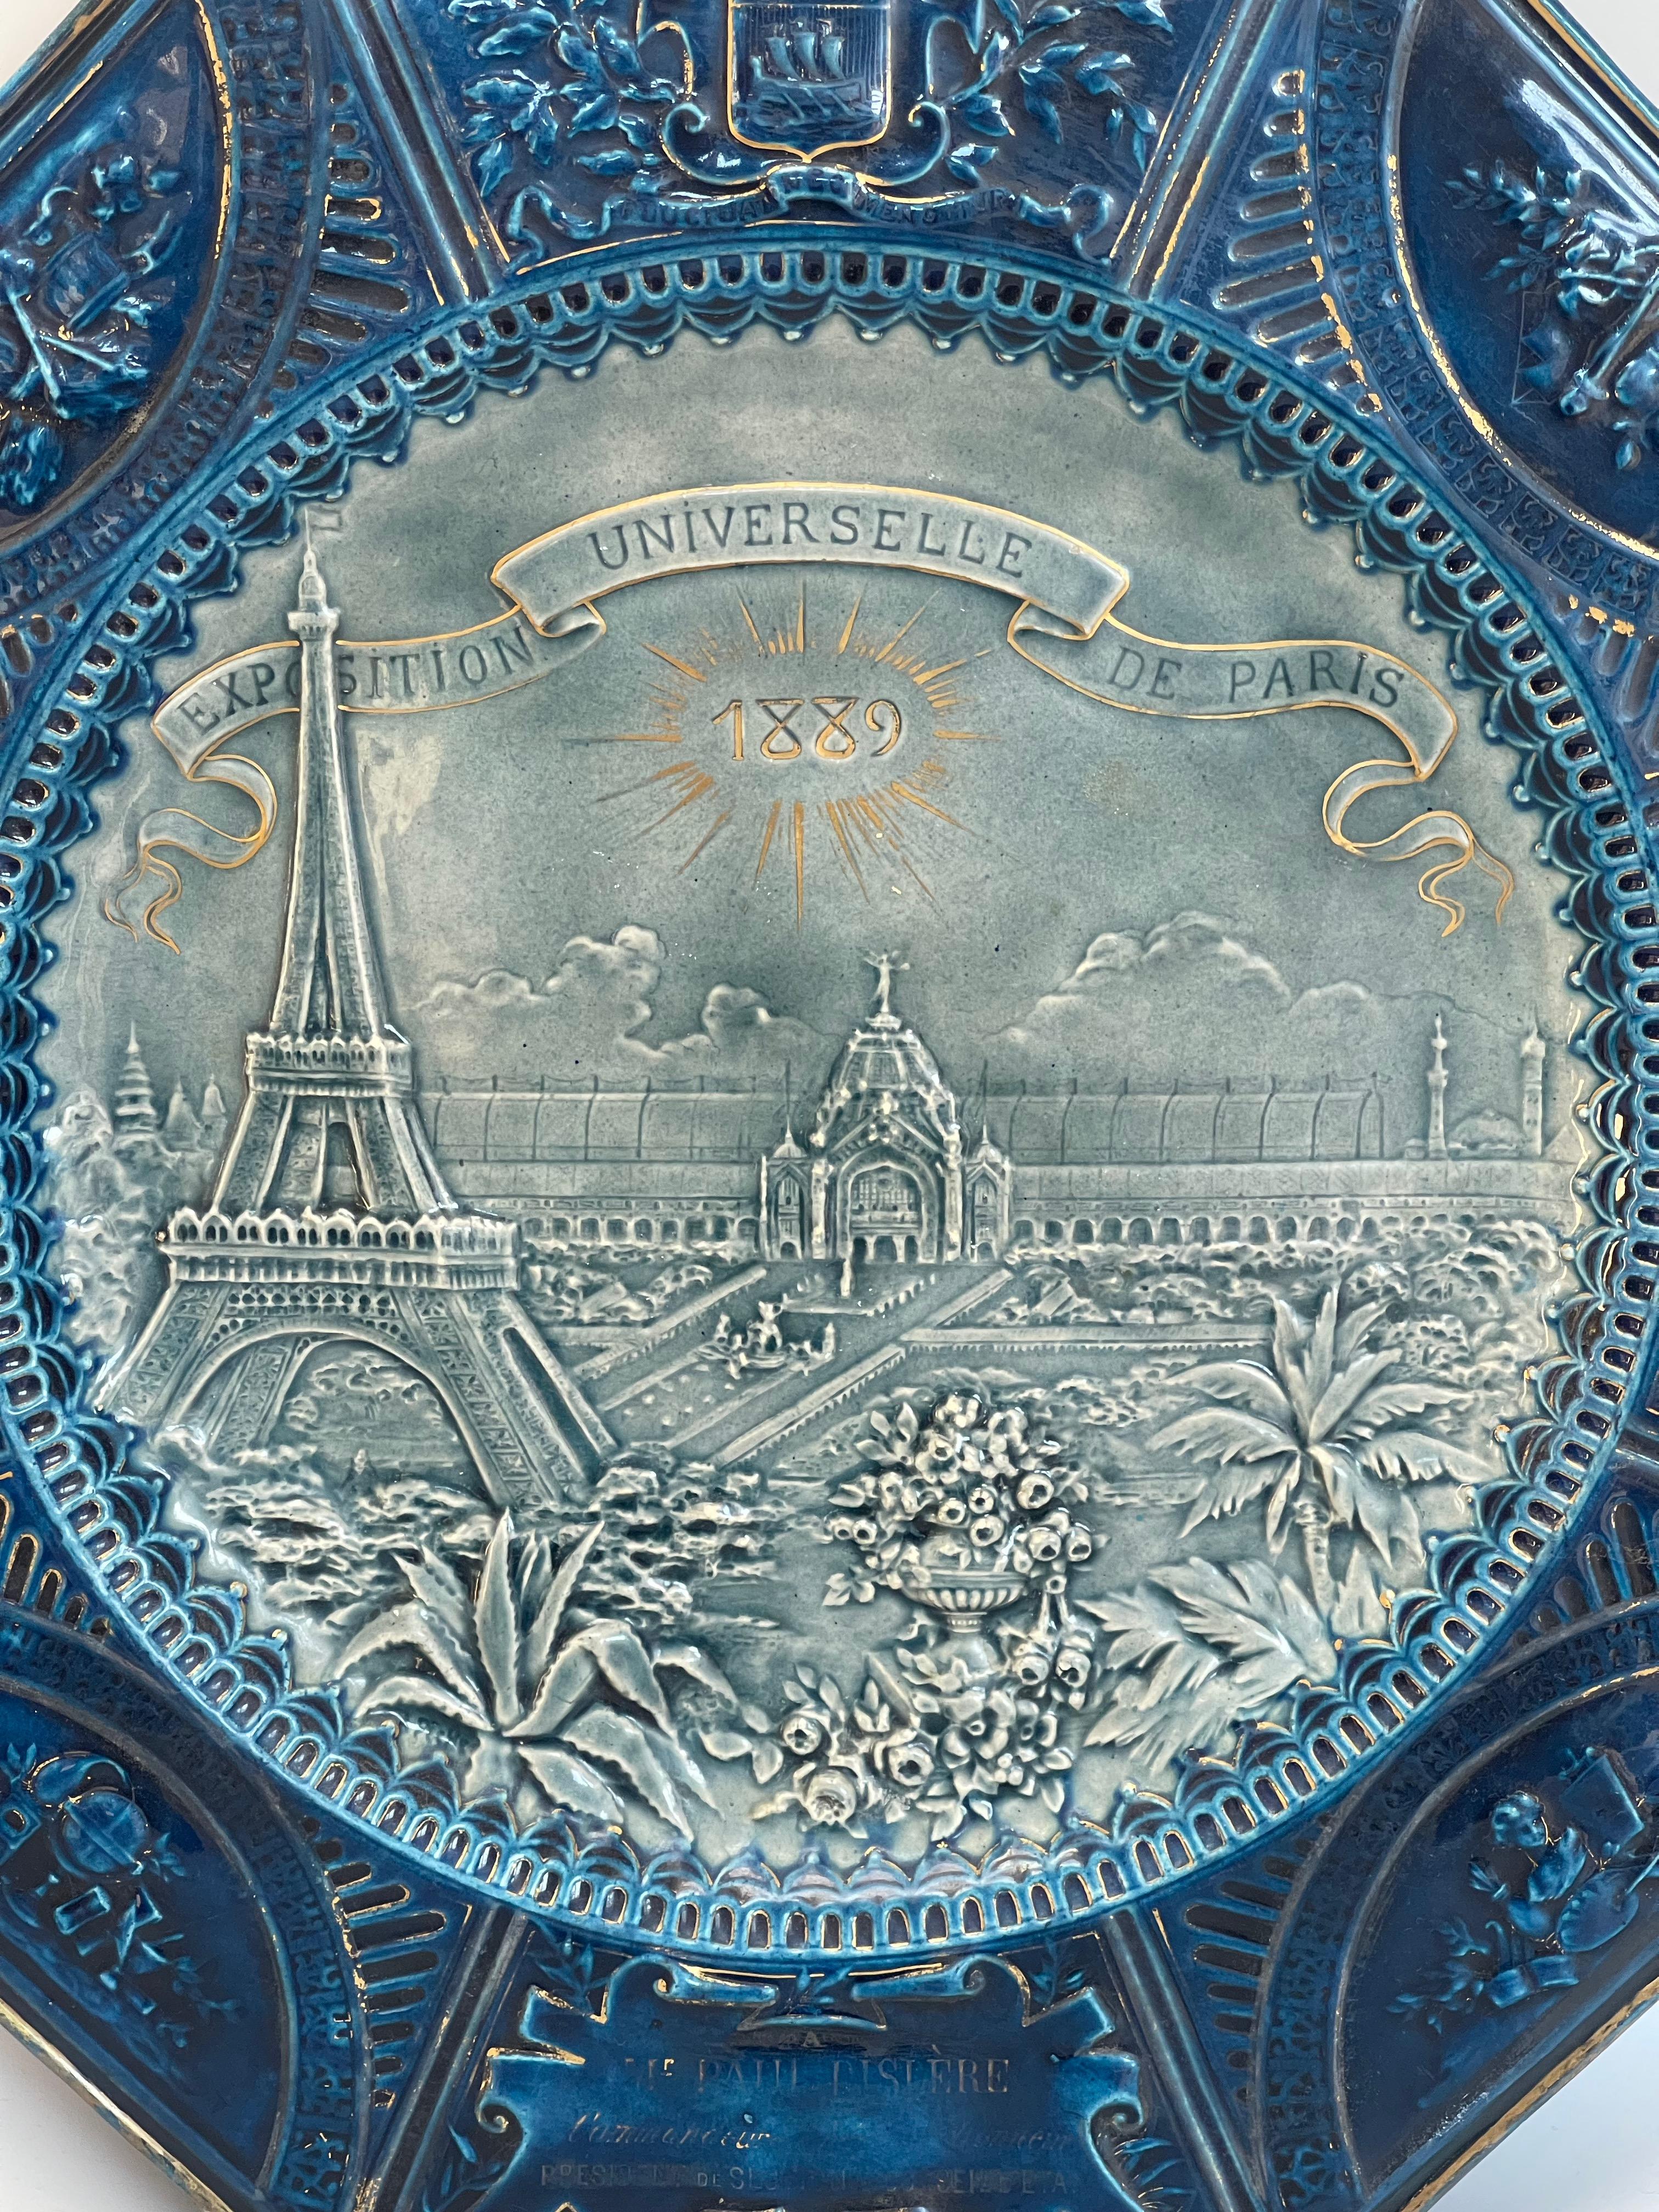 UNIVERSAL EXHIBITION 1889 Large octagonal dish in enamelled slip, the blue and gilt wing with the arms of Paris, adorned with foliage cartouches, festoons, attributes of the sciences, arts, music and agriculture, the center decorated in half relief